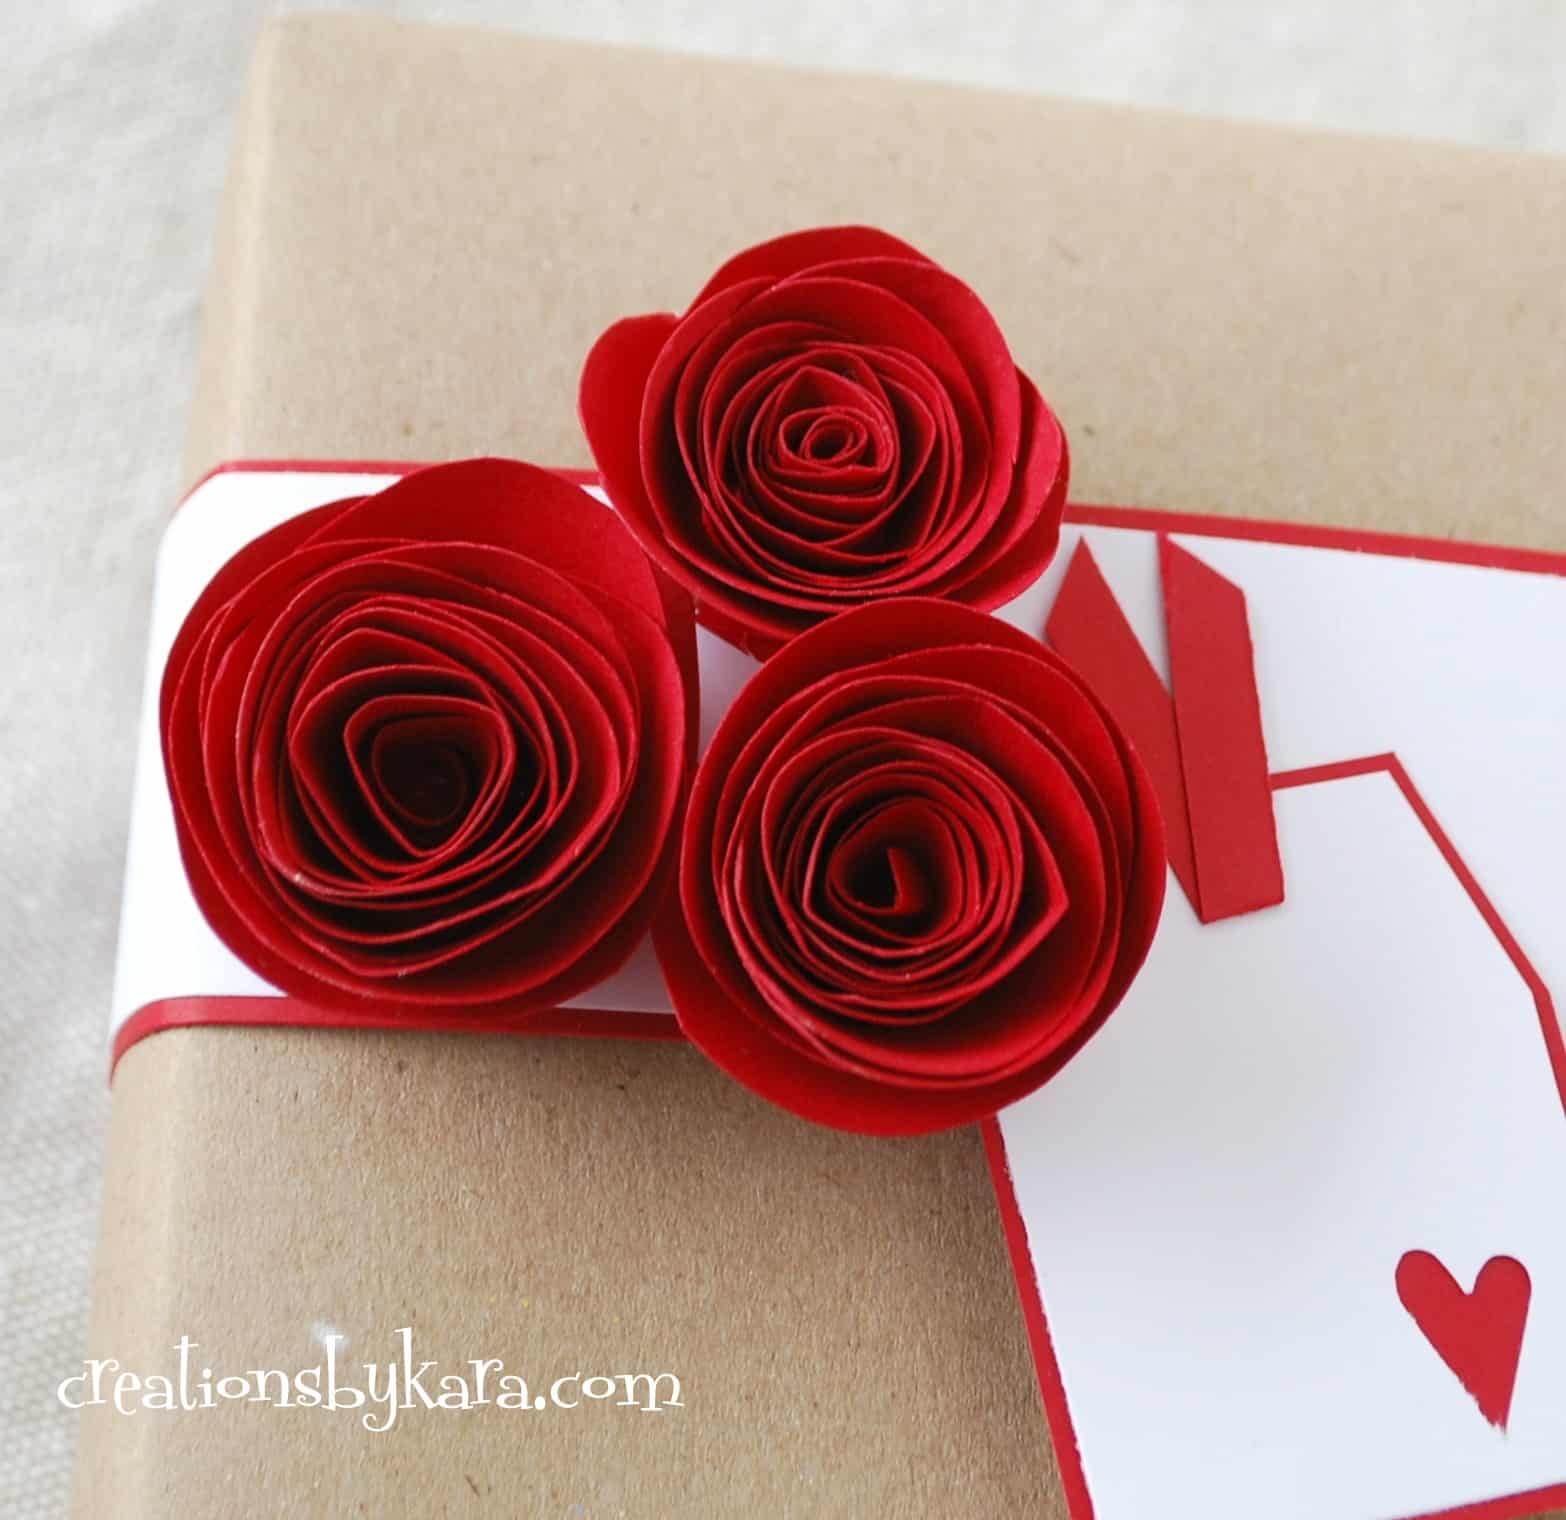 How to Make Beautiful Paper Roses - Creations by Kara